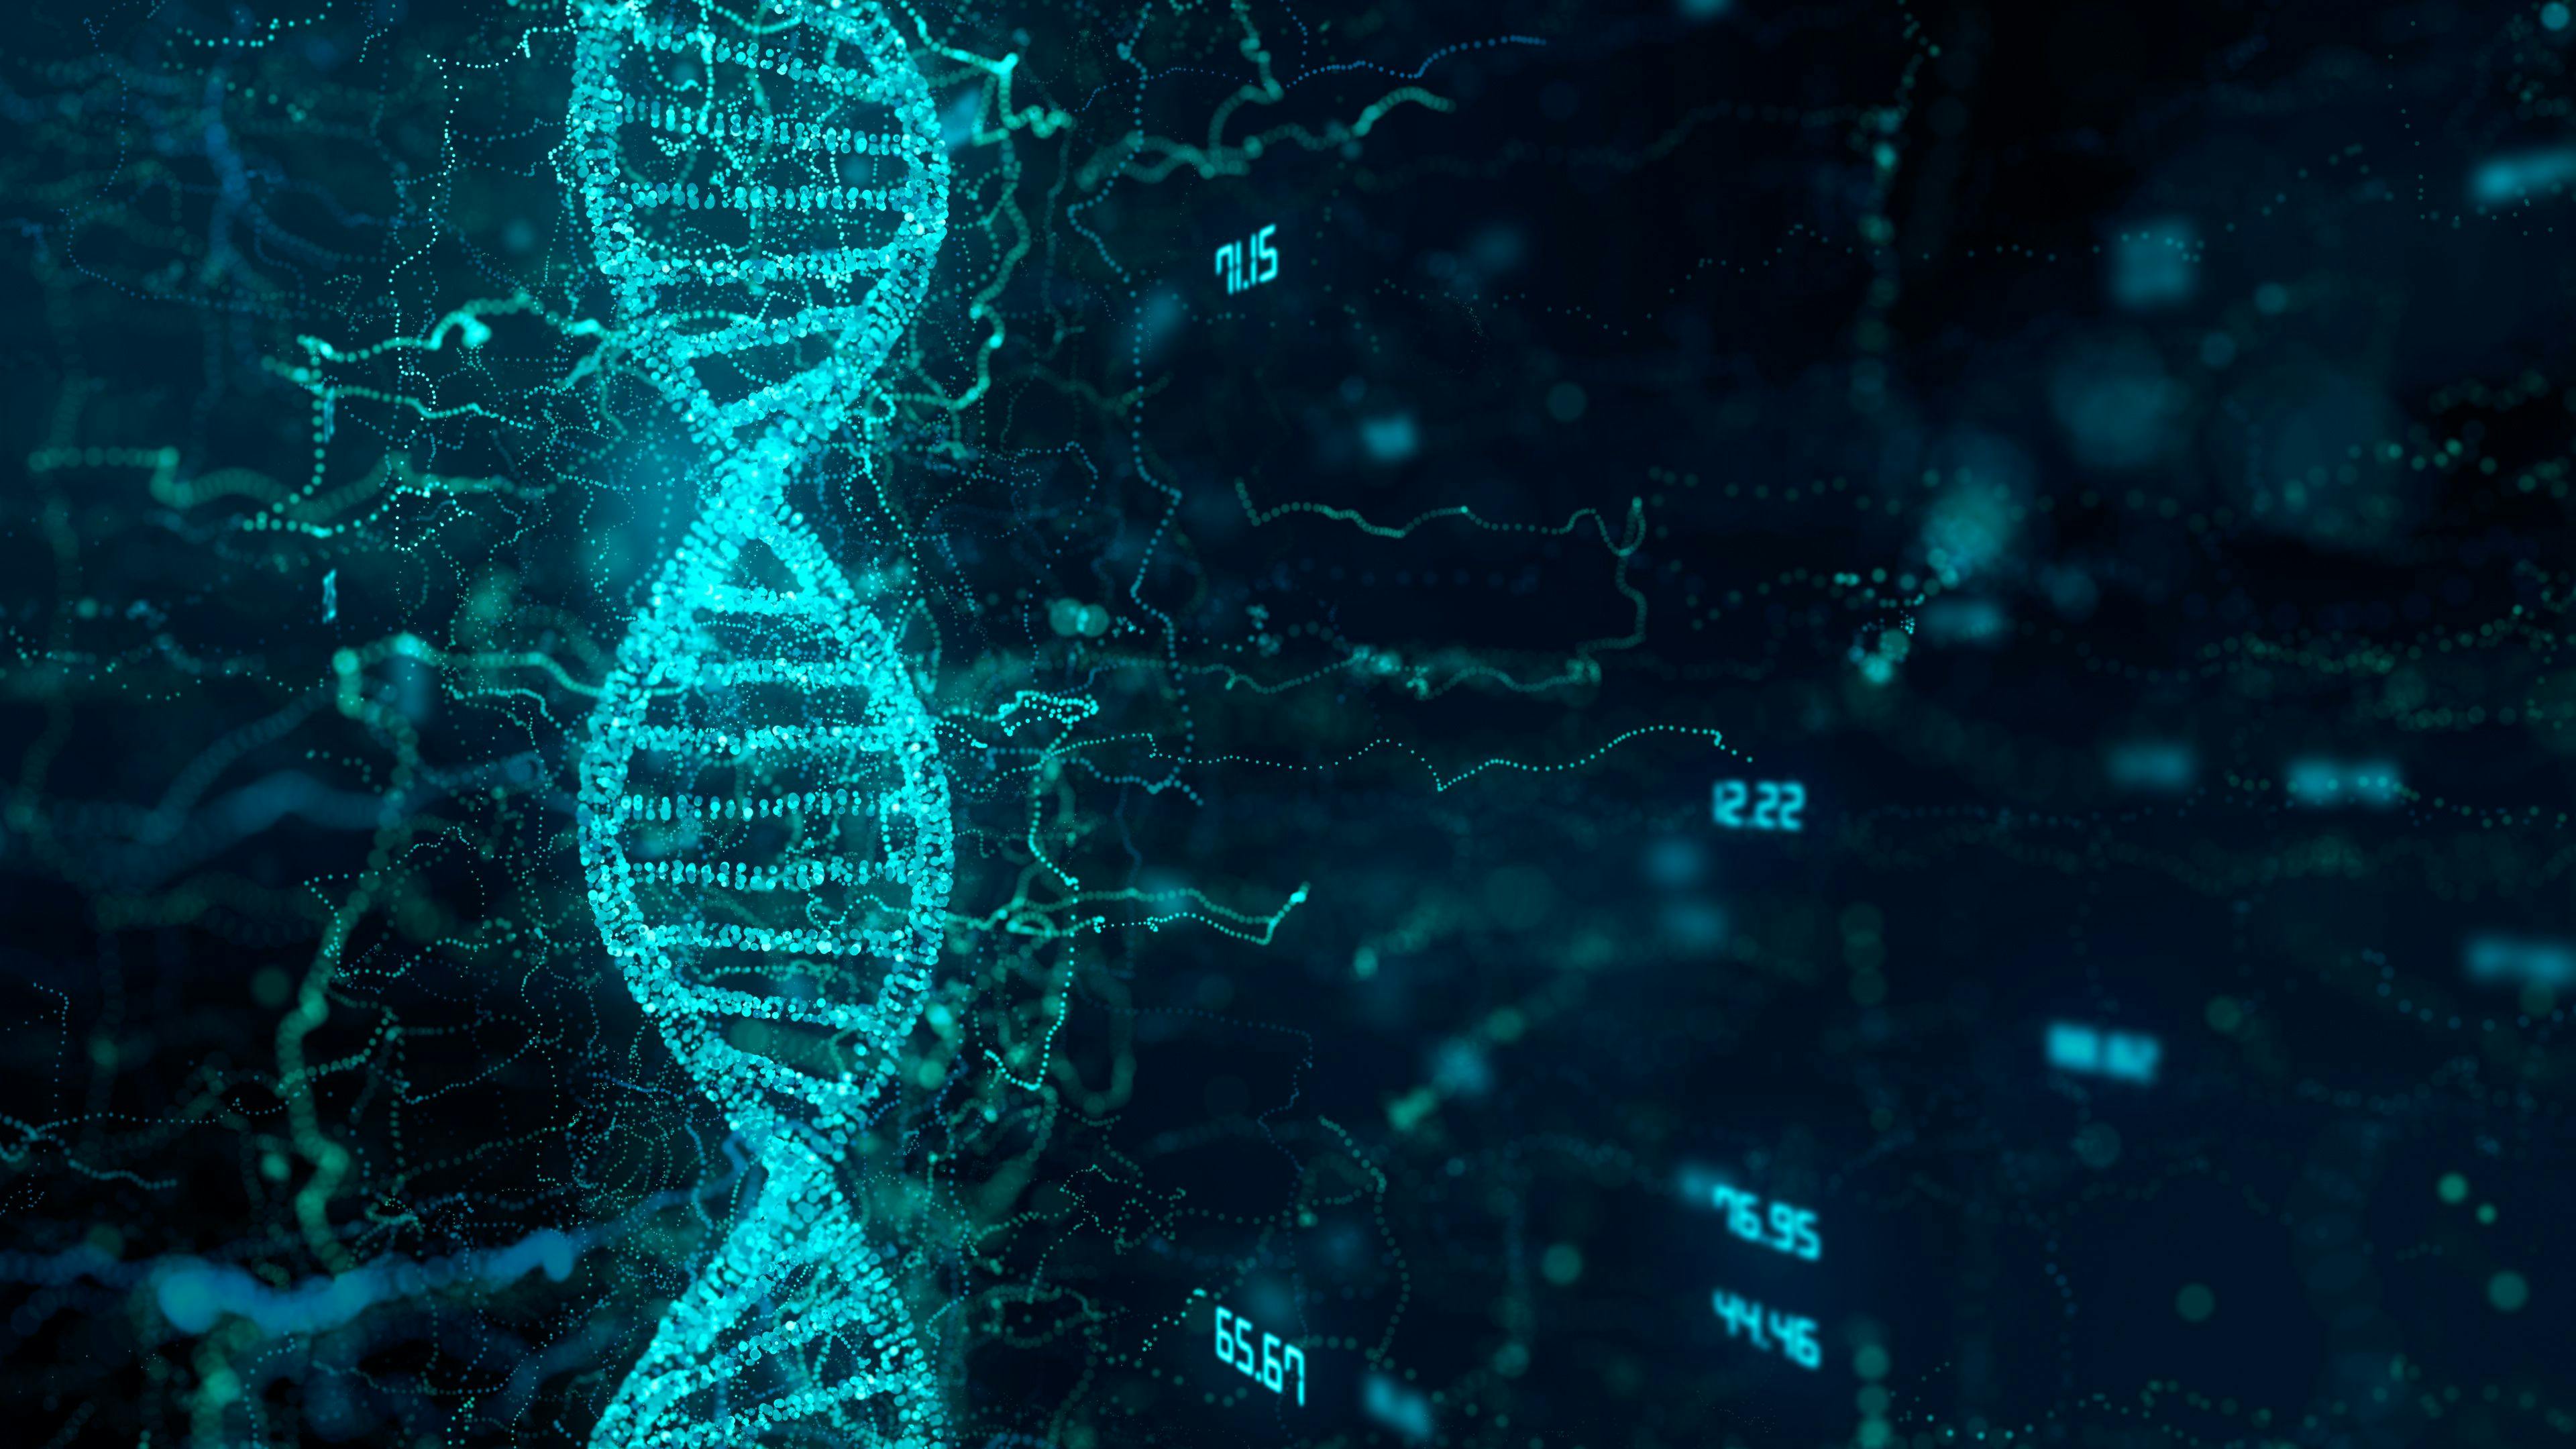 A genetic association can help in identifying those at higher susceptibility to any of the diseases | Image credit: immimagery - stock.adobe.com